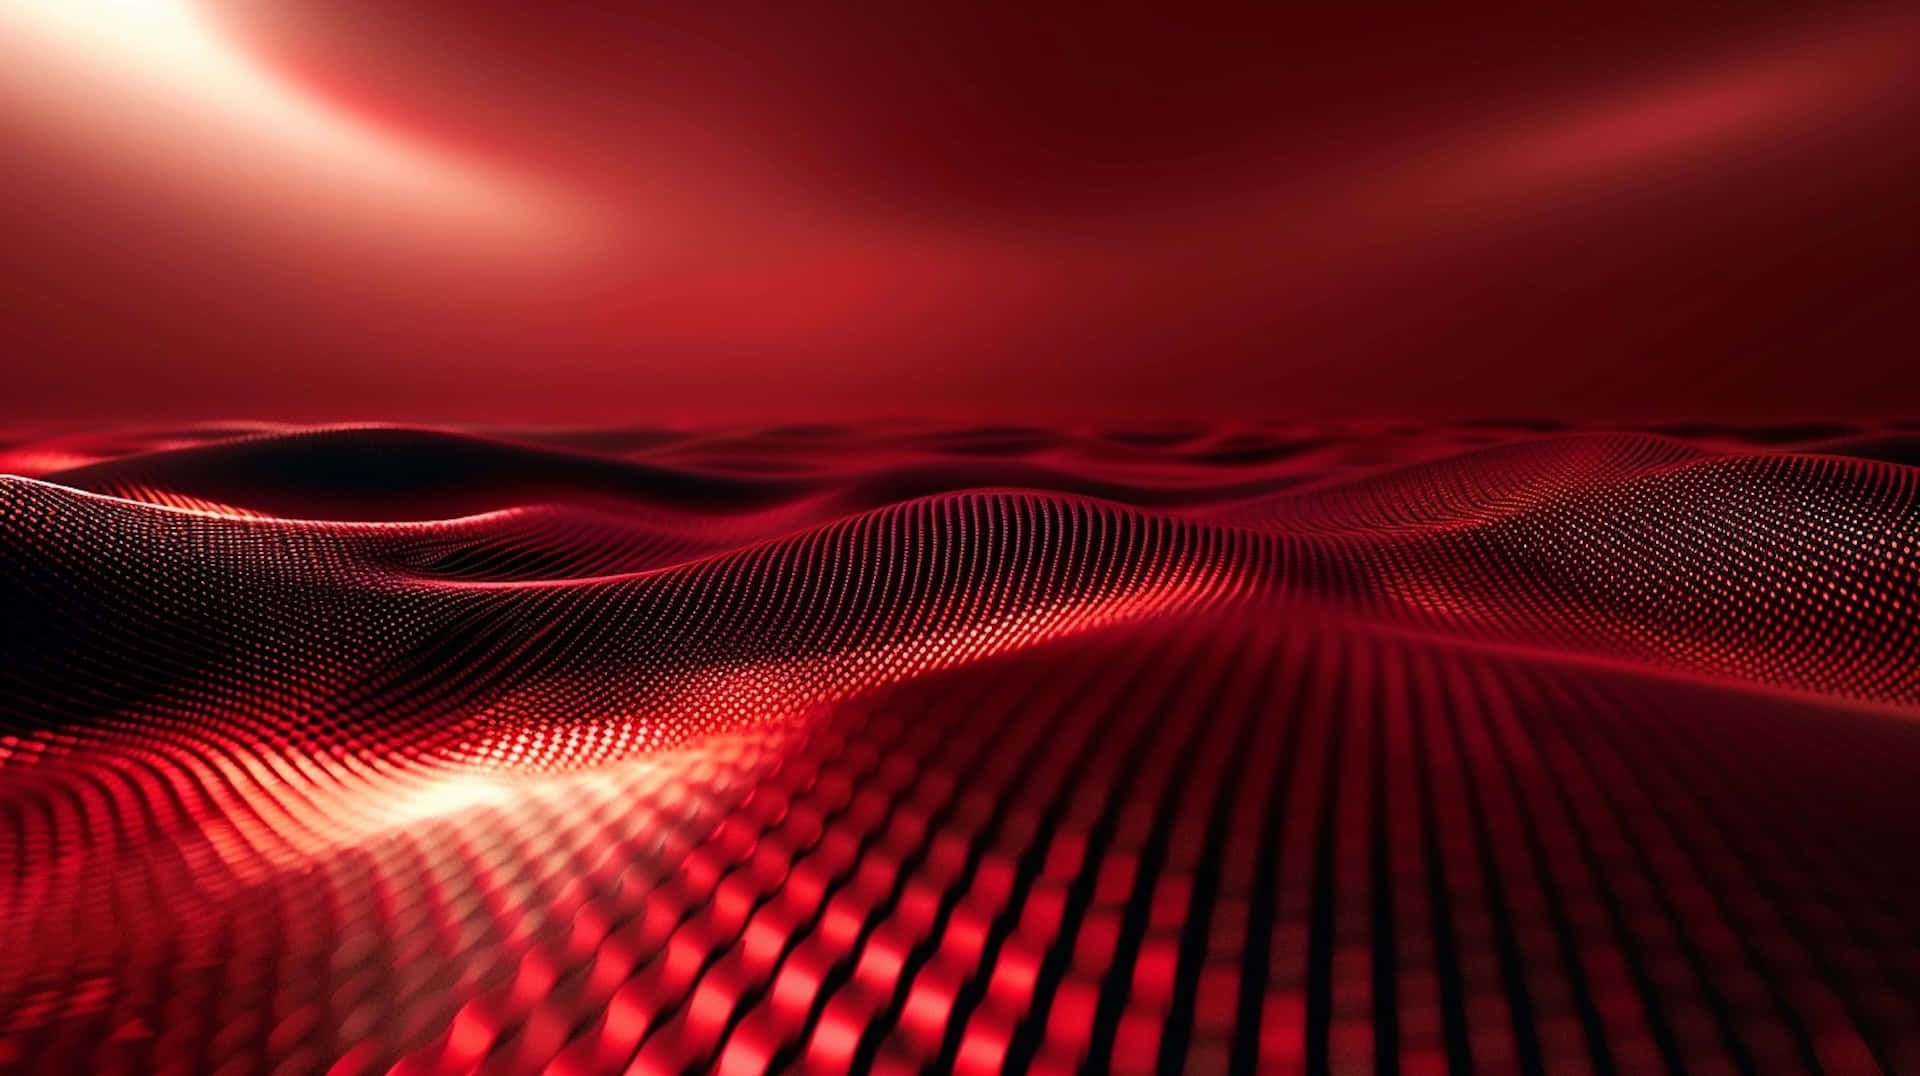 Red Digital Waves Abstract Wallpaper